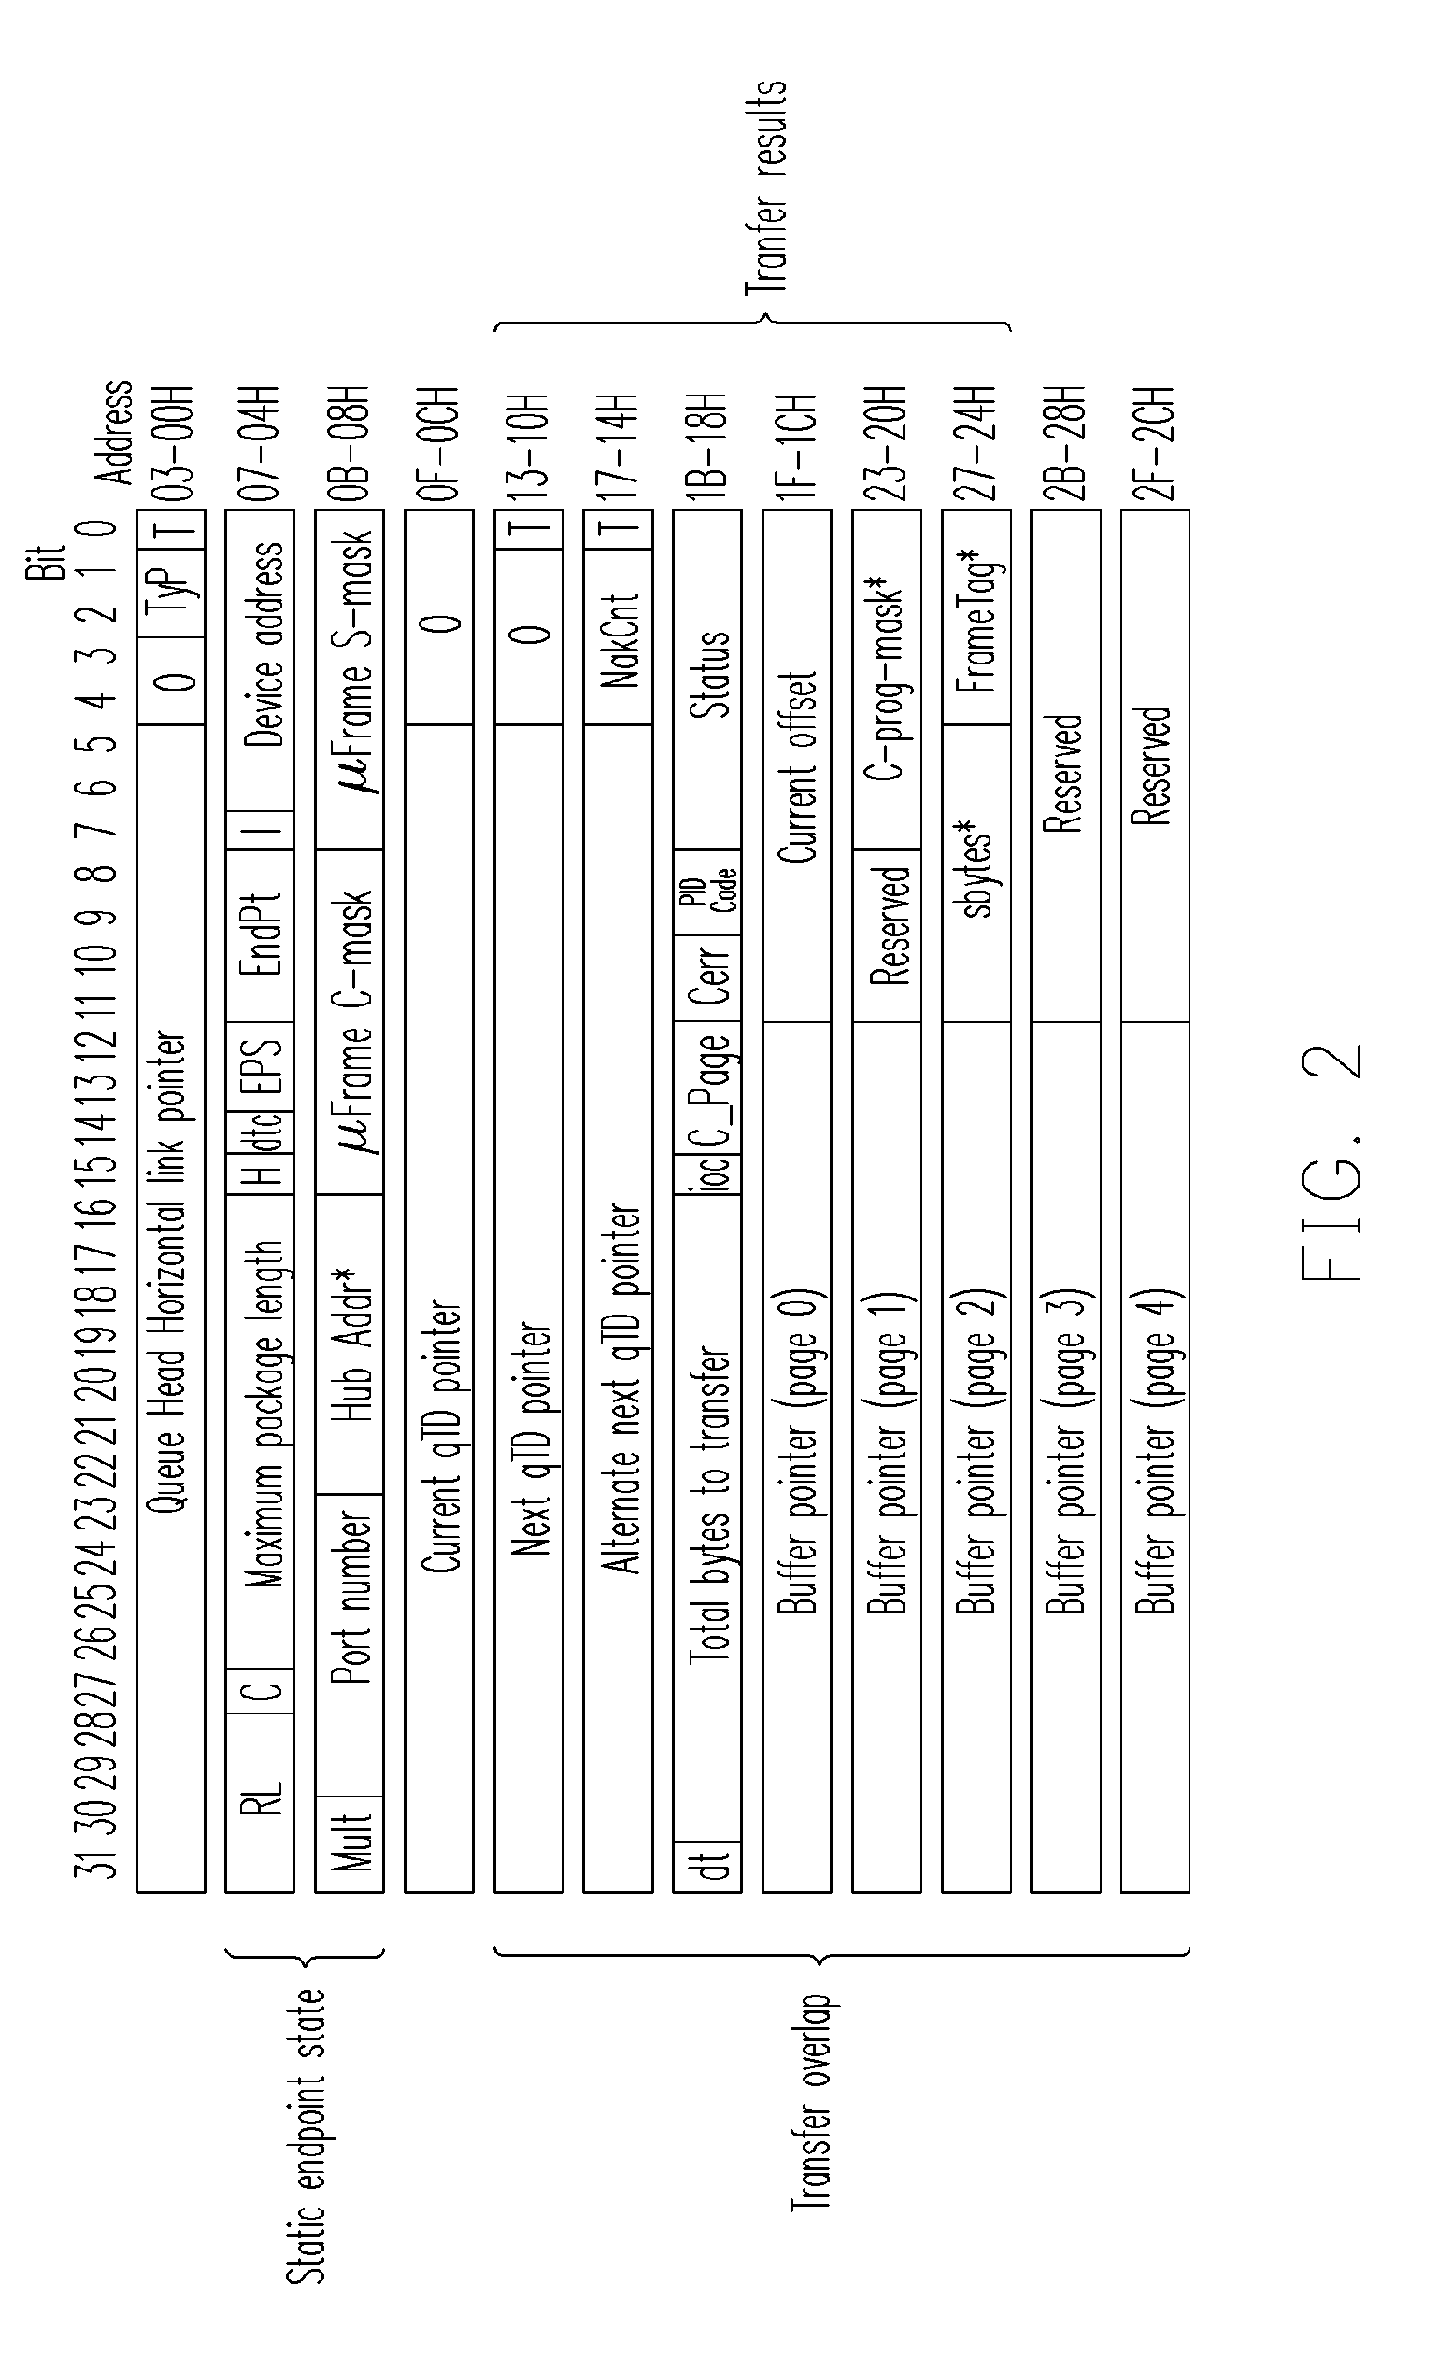 Universal serial bus (USB) system with single port and host controller thereof